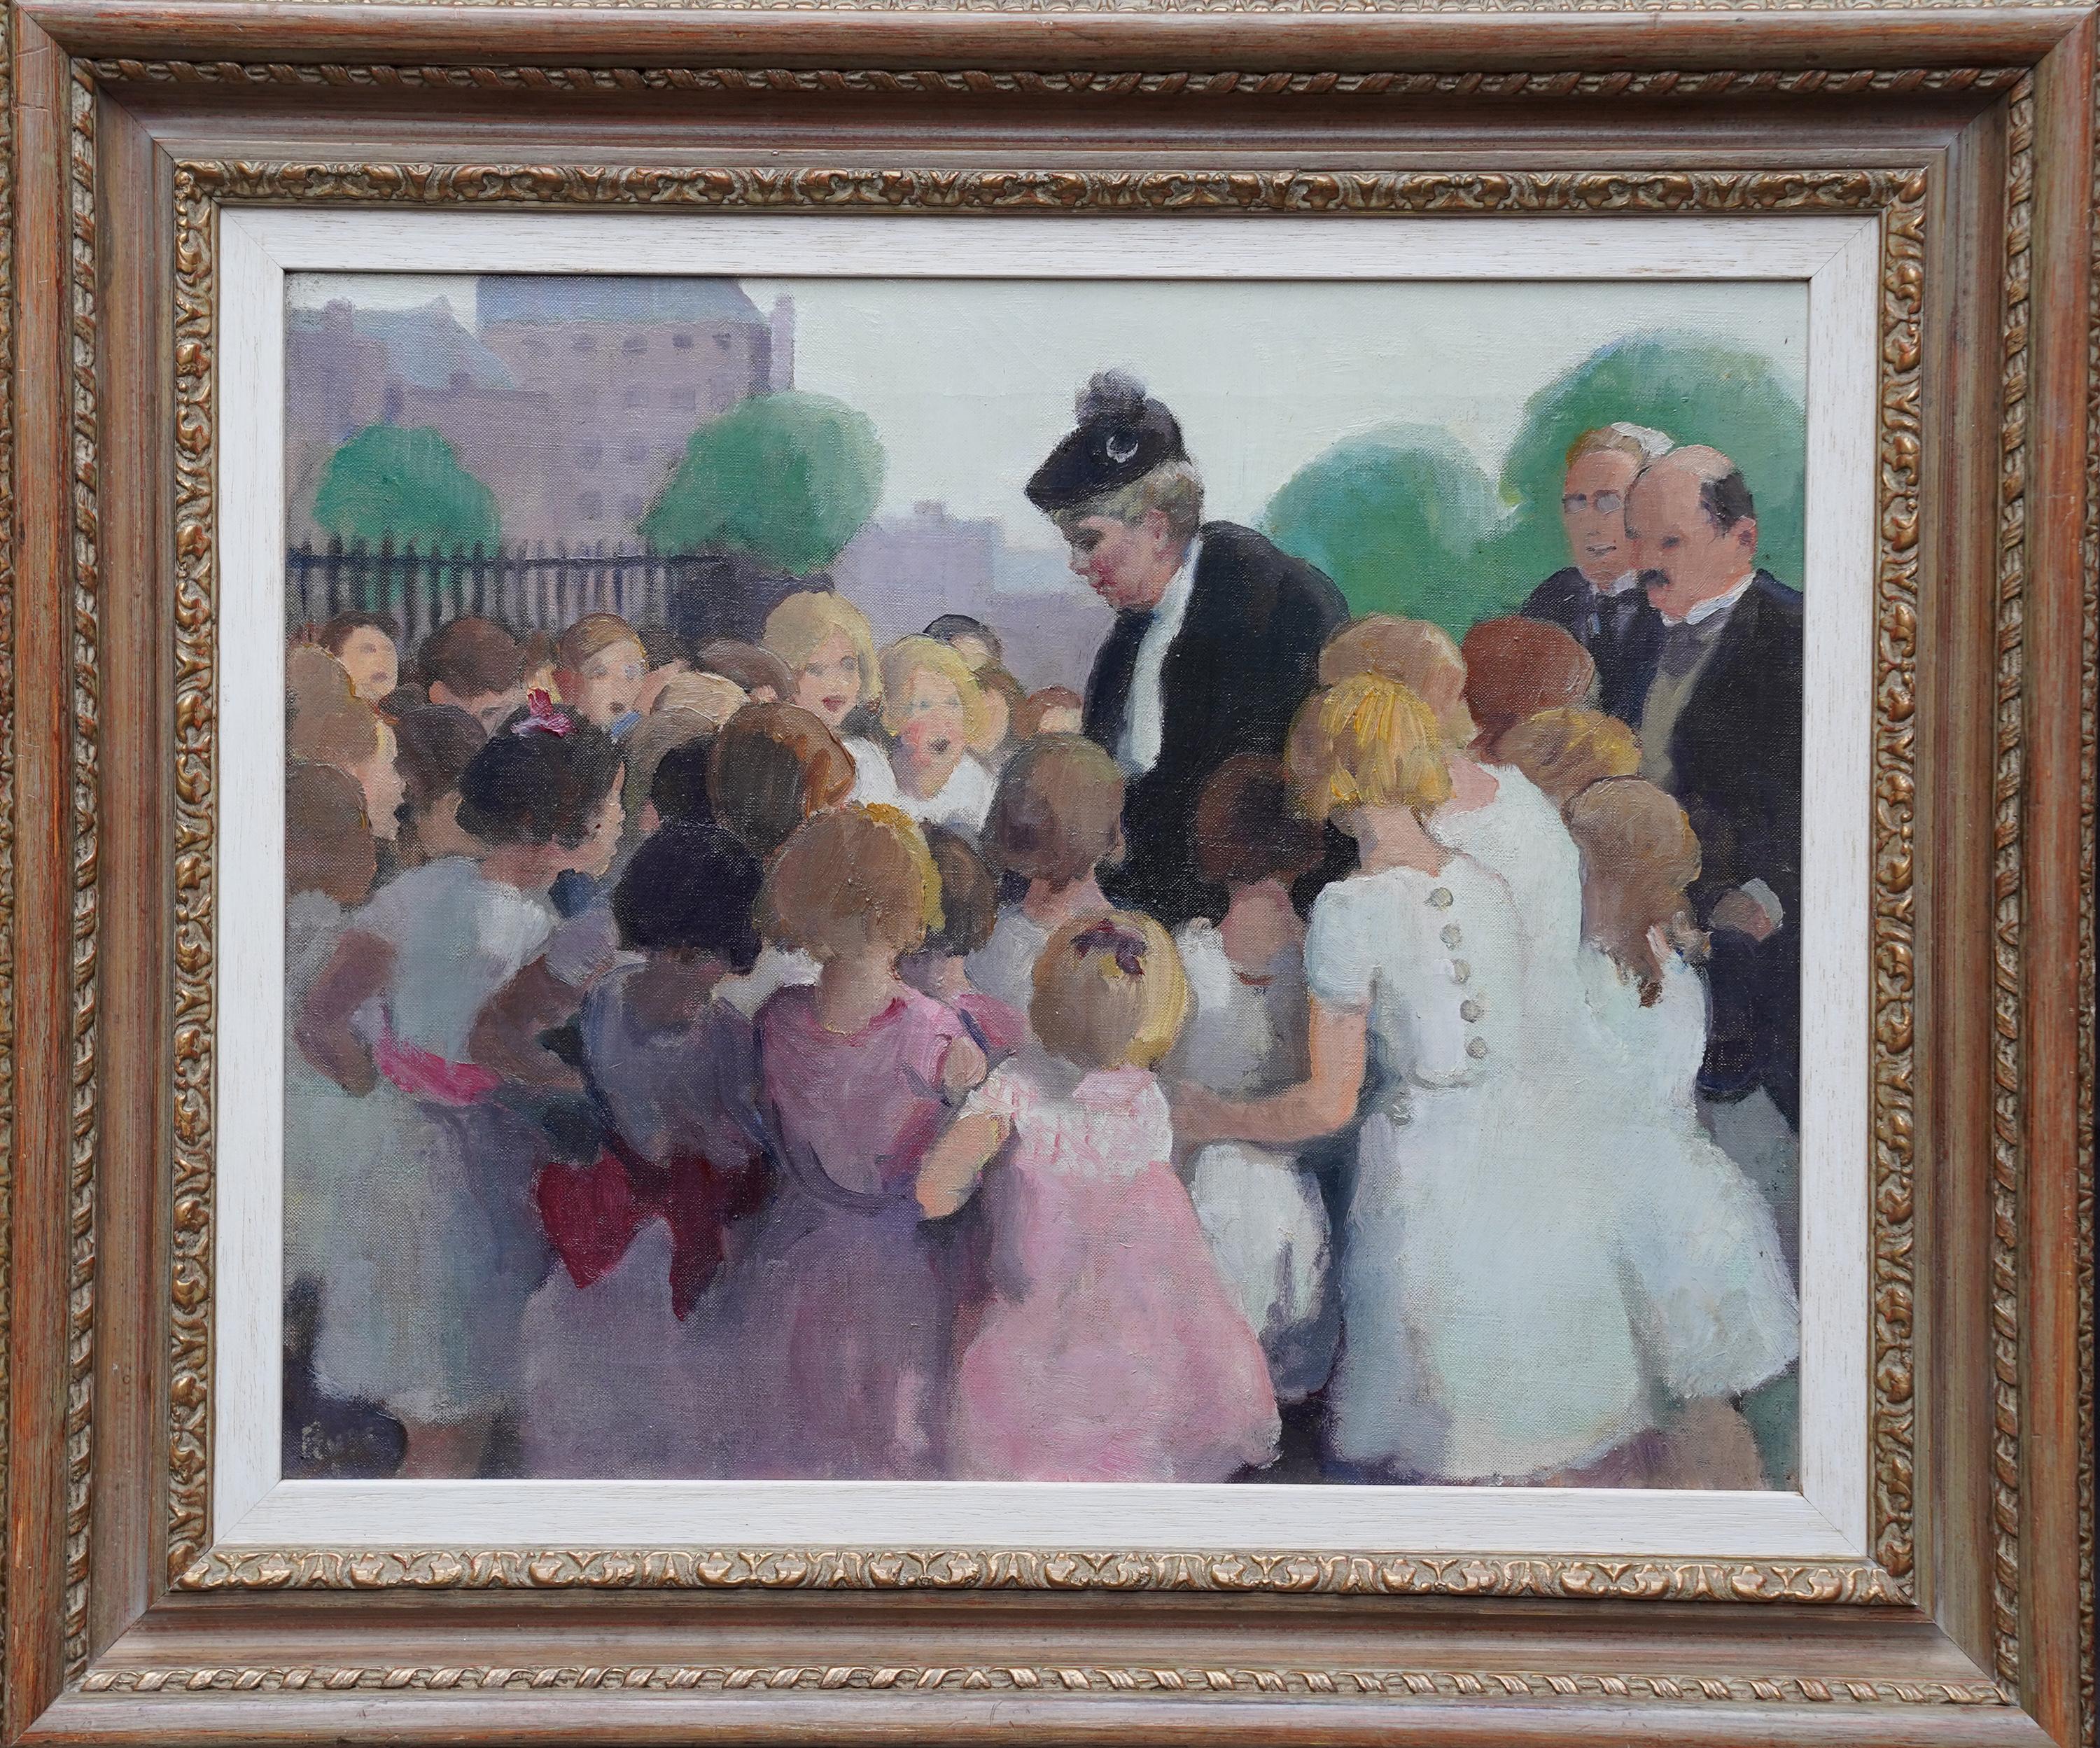 Queen Mary Greeting School Children - British 1910 royalty portrait oil painting For Sale 3